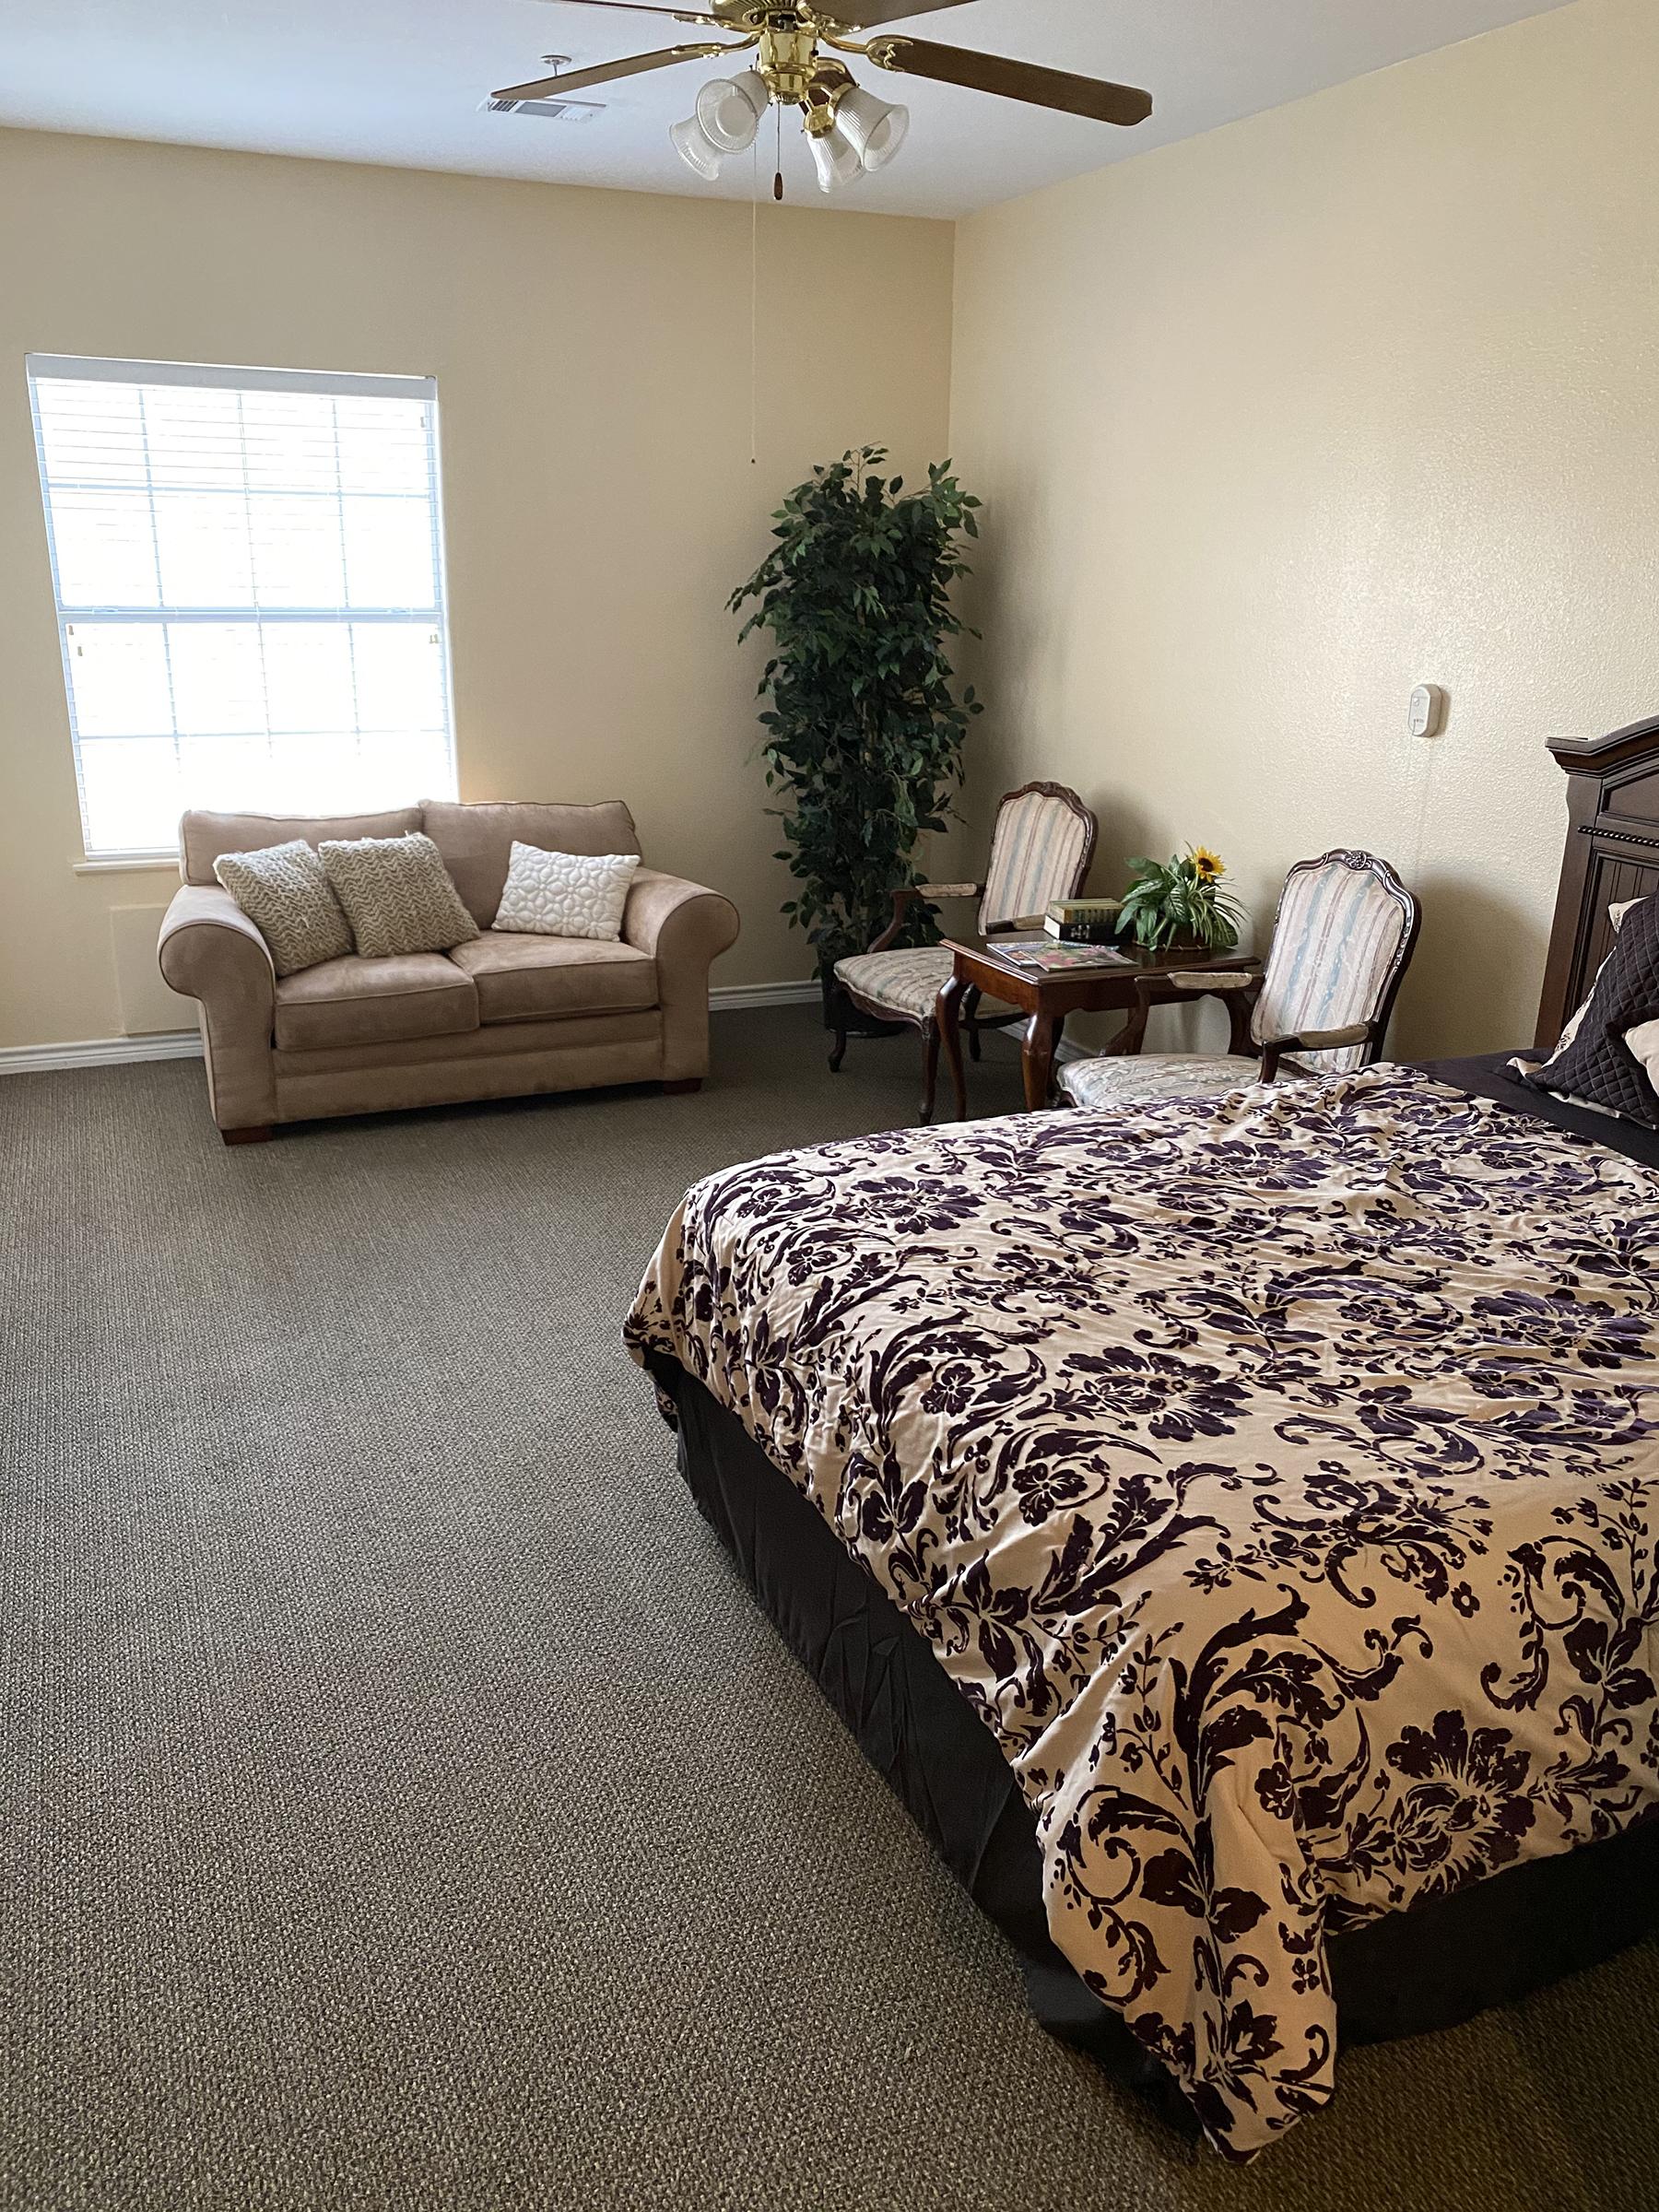 Bedroom at Stone Brook Assisted Living and Memory Care